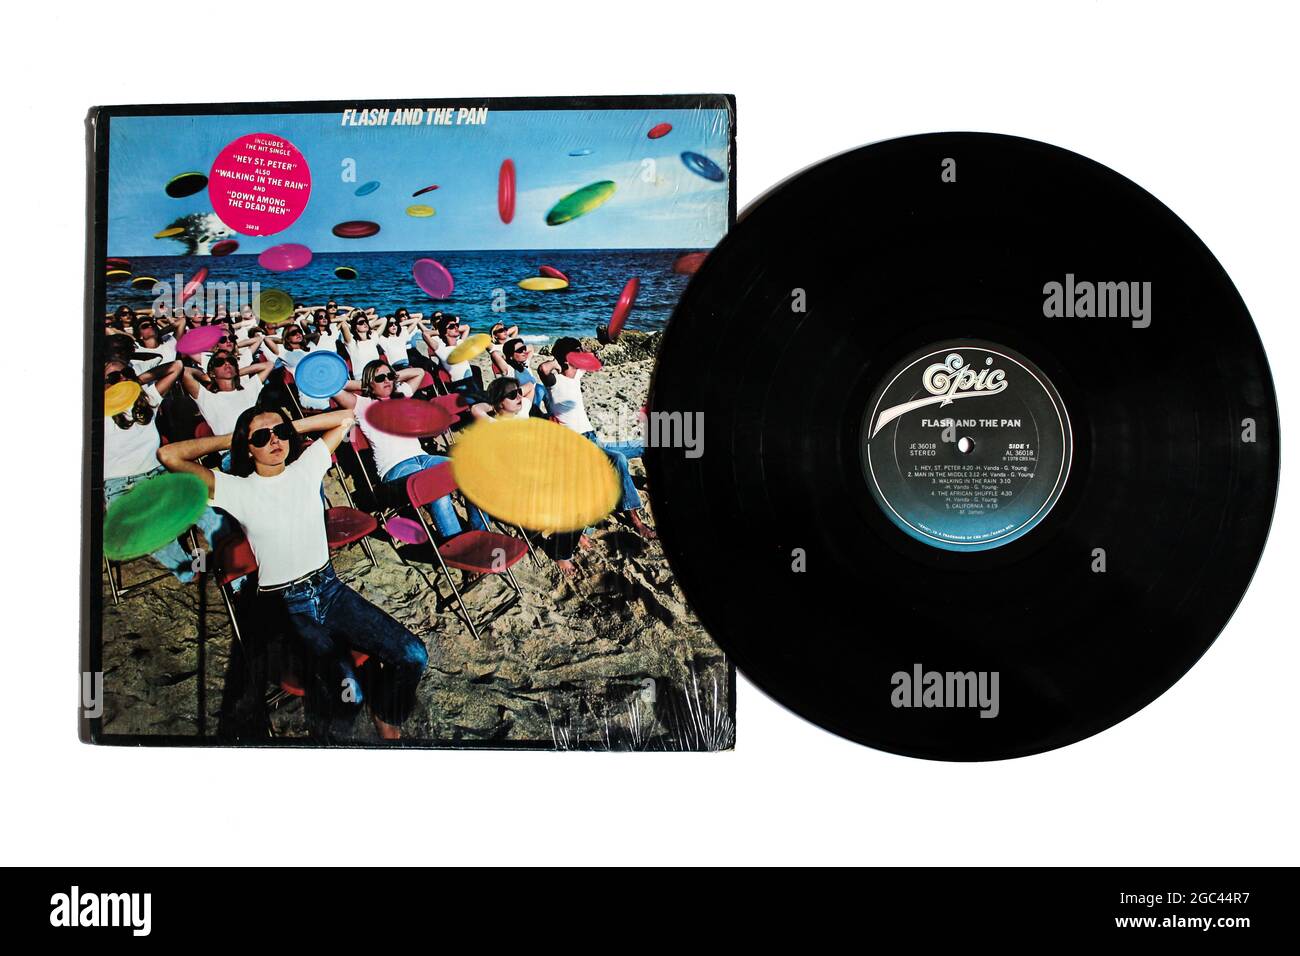 New wave and rock band, Flash and the Pan music album on vinyl record LP disc. Self titled: Flash And The Pan album cover Stock Photo